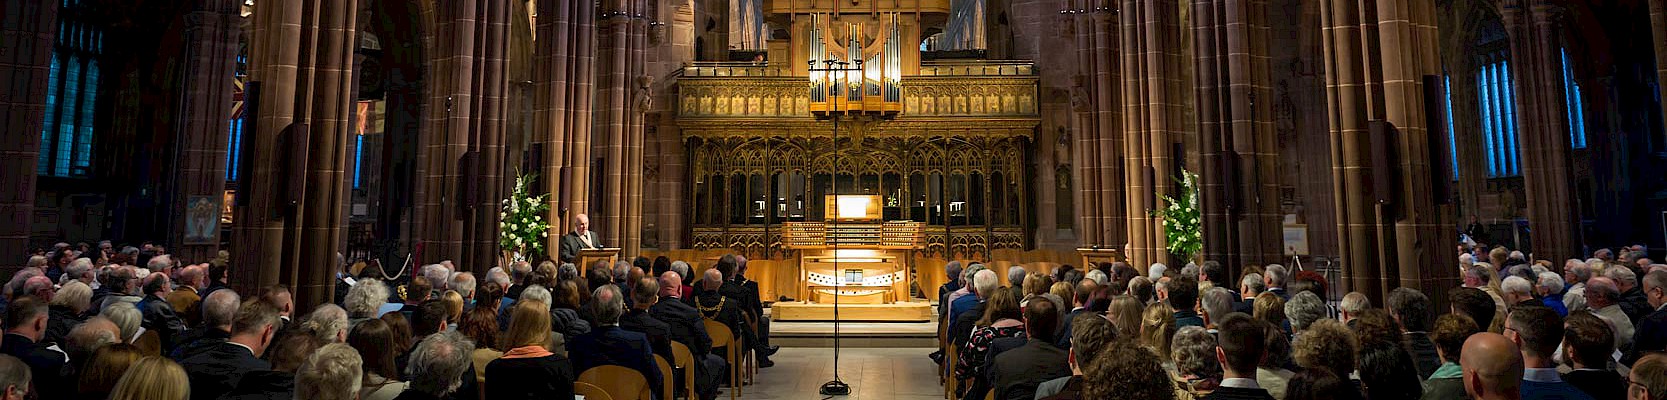 Manchester Cathedral Organ